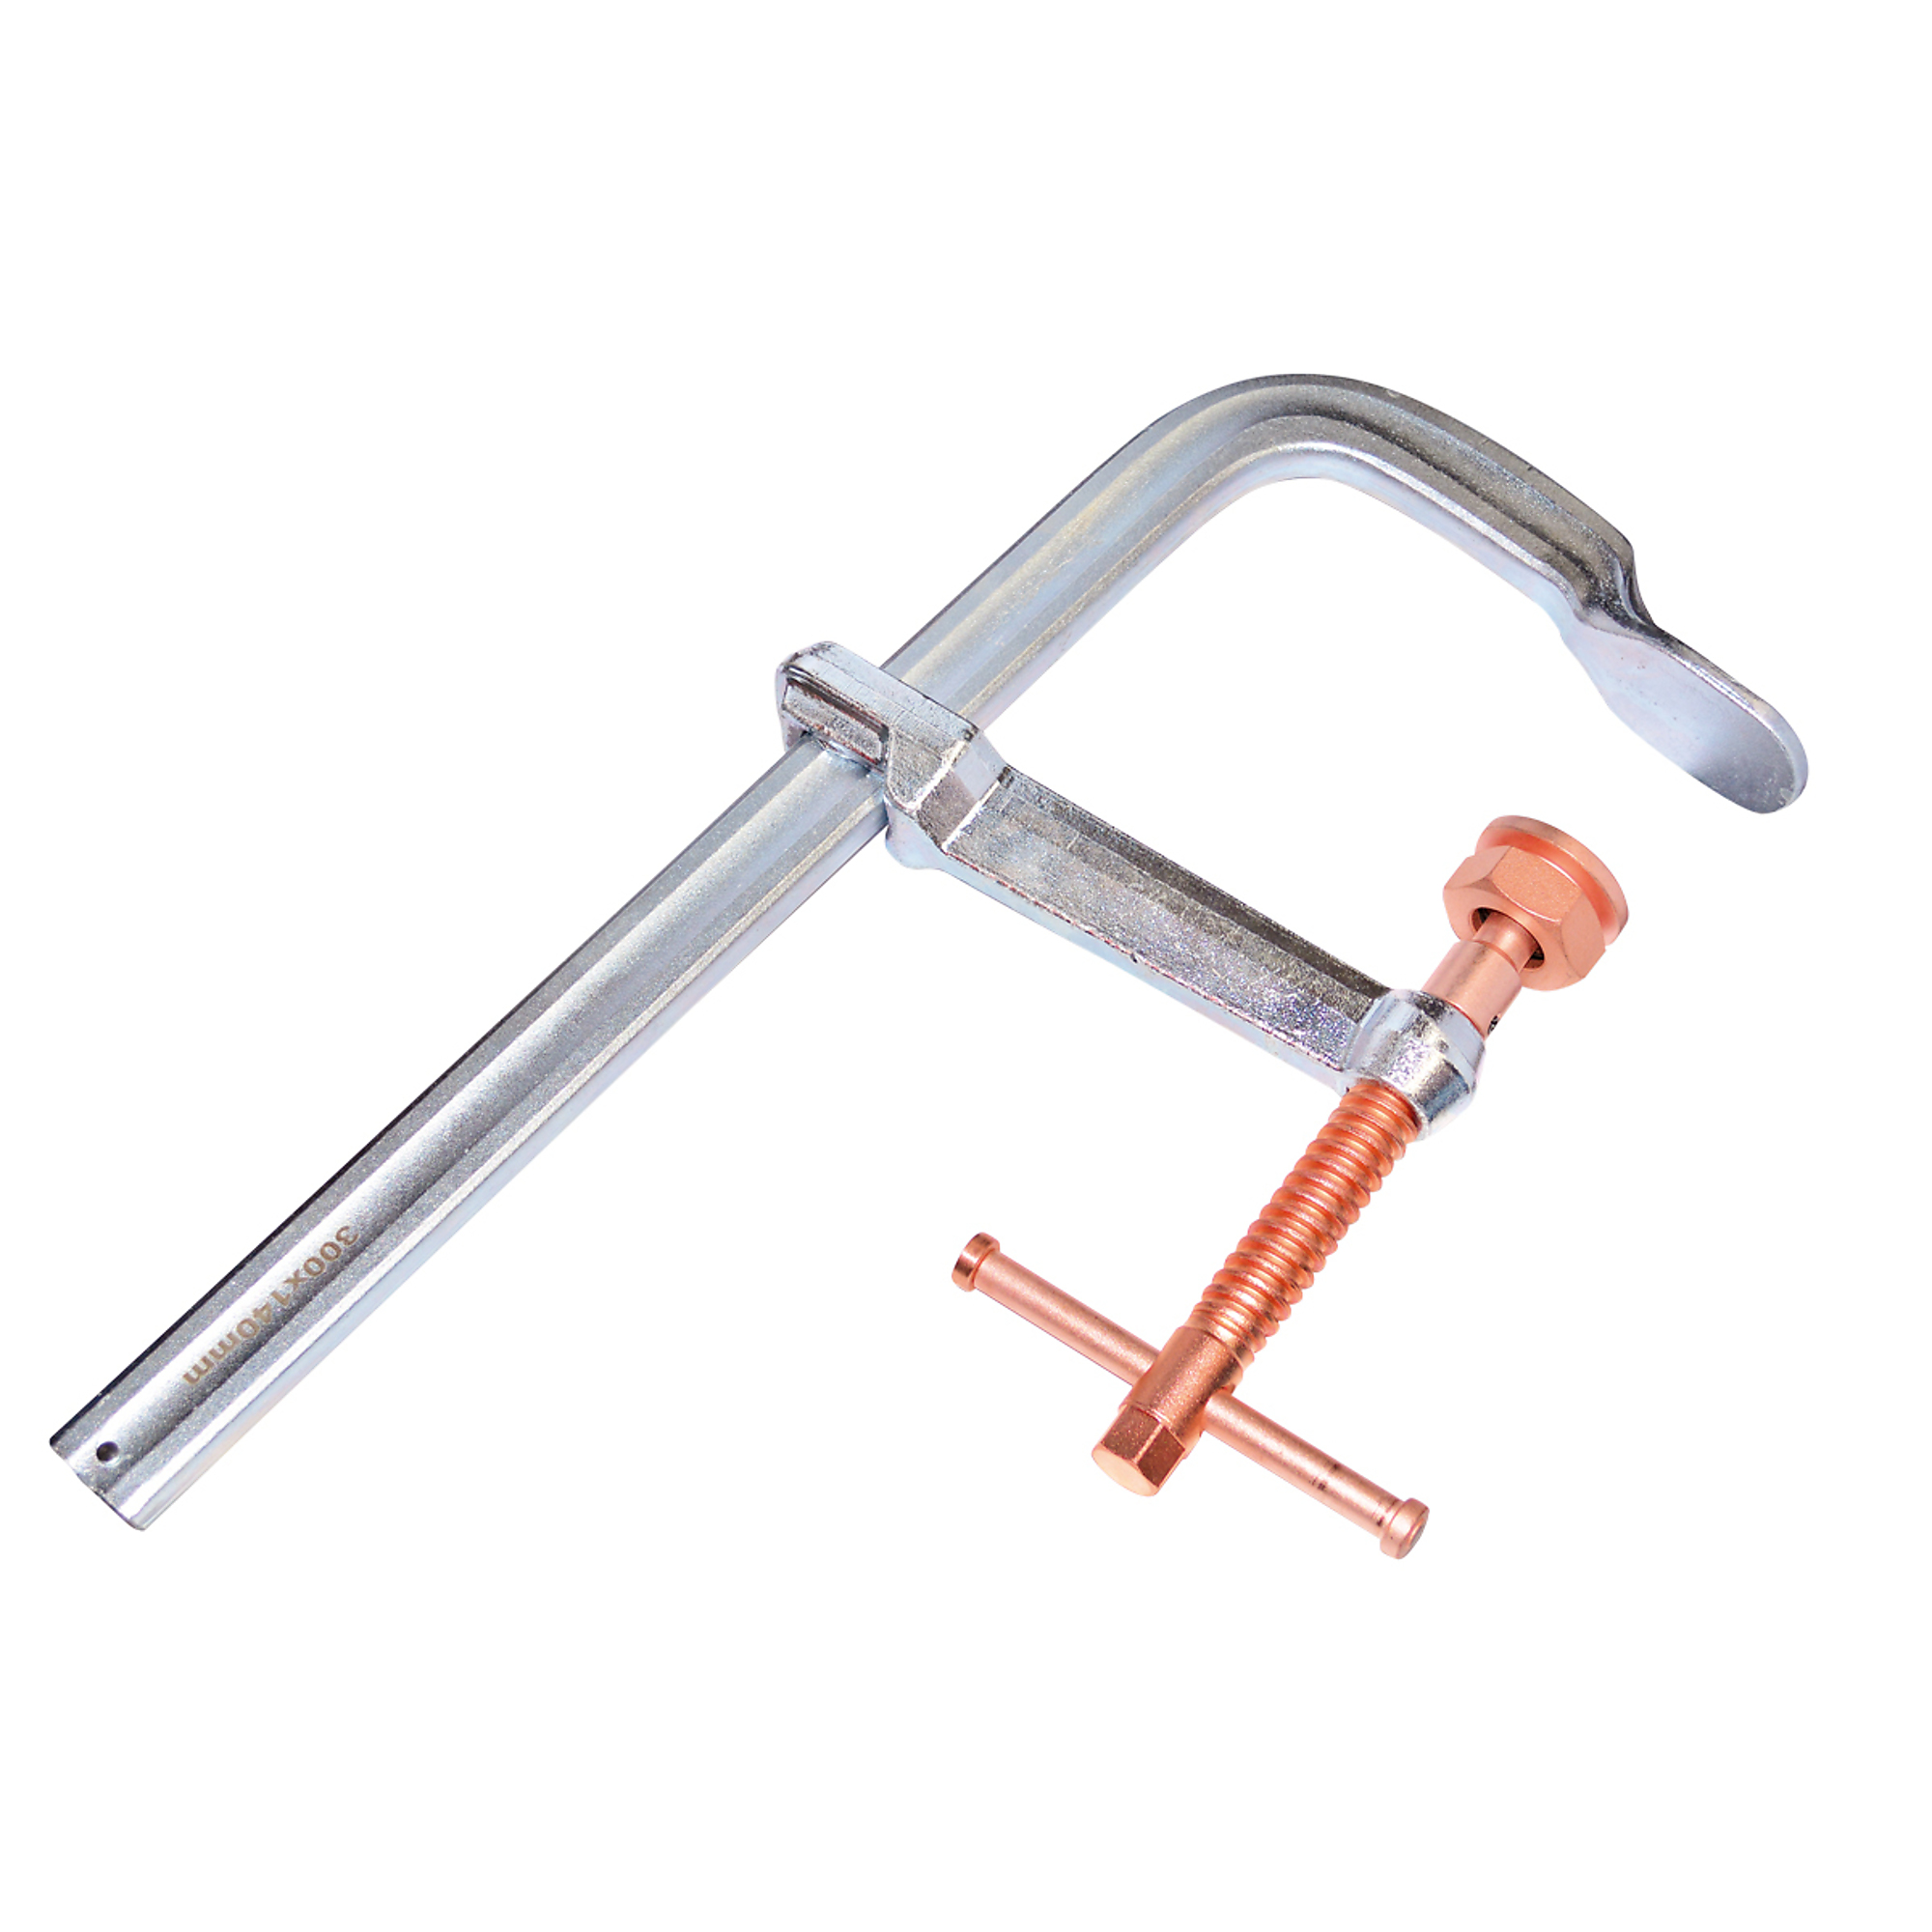 KANCA, HEAVY DUTY CLAMP W. COPPER SCREW 300 MM - 12Inch, Clamp Pressure 2700 lb, Opening Size 12 in, Pieces (qty.) 1 Model Heavy Duty Clamp w. Copper